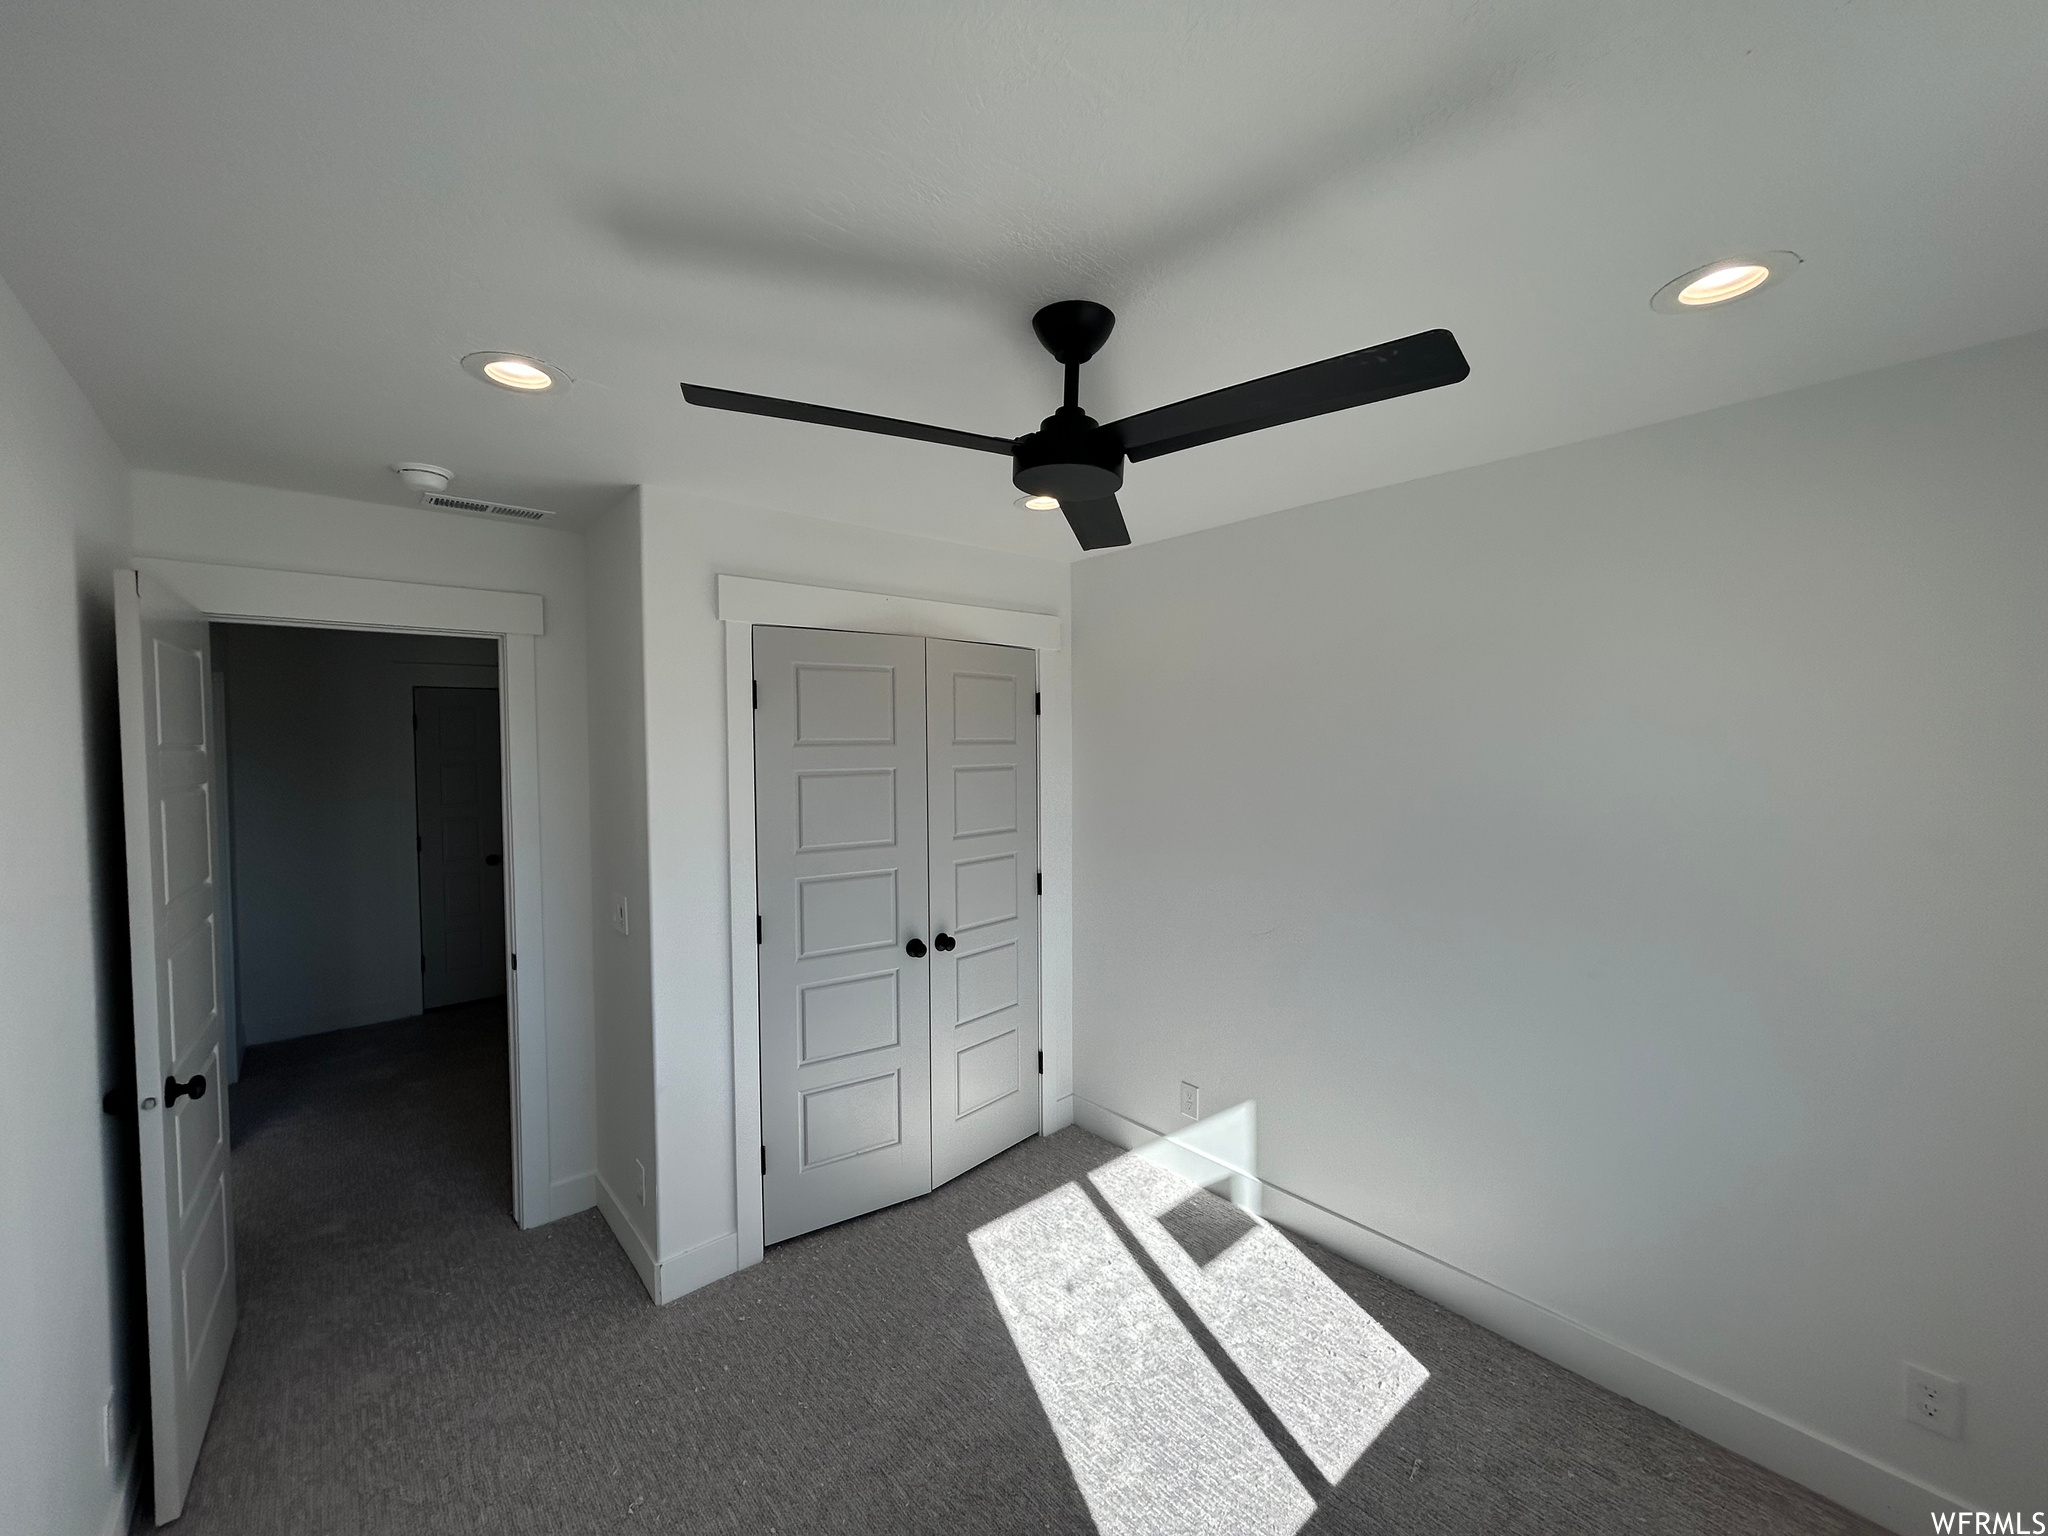 Unfurnished bedroom featuring ceiling fan, dark carpet, and a closet